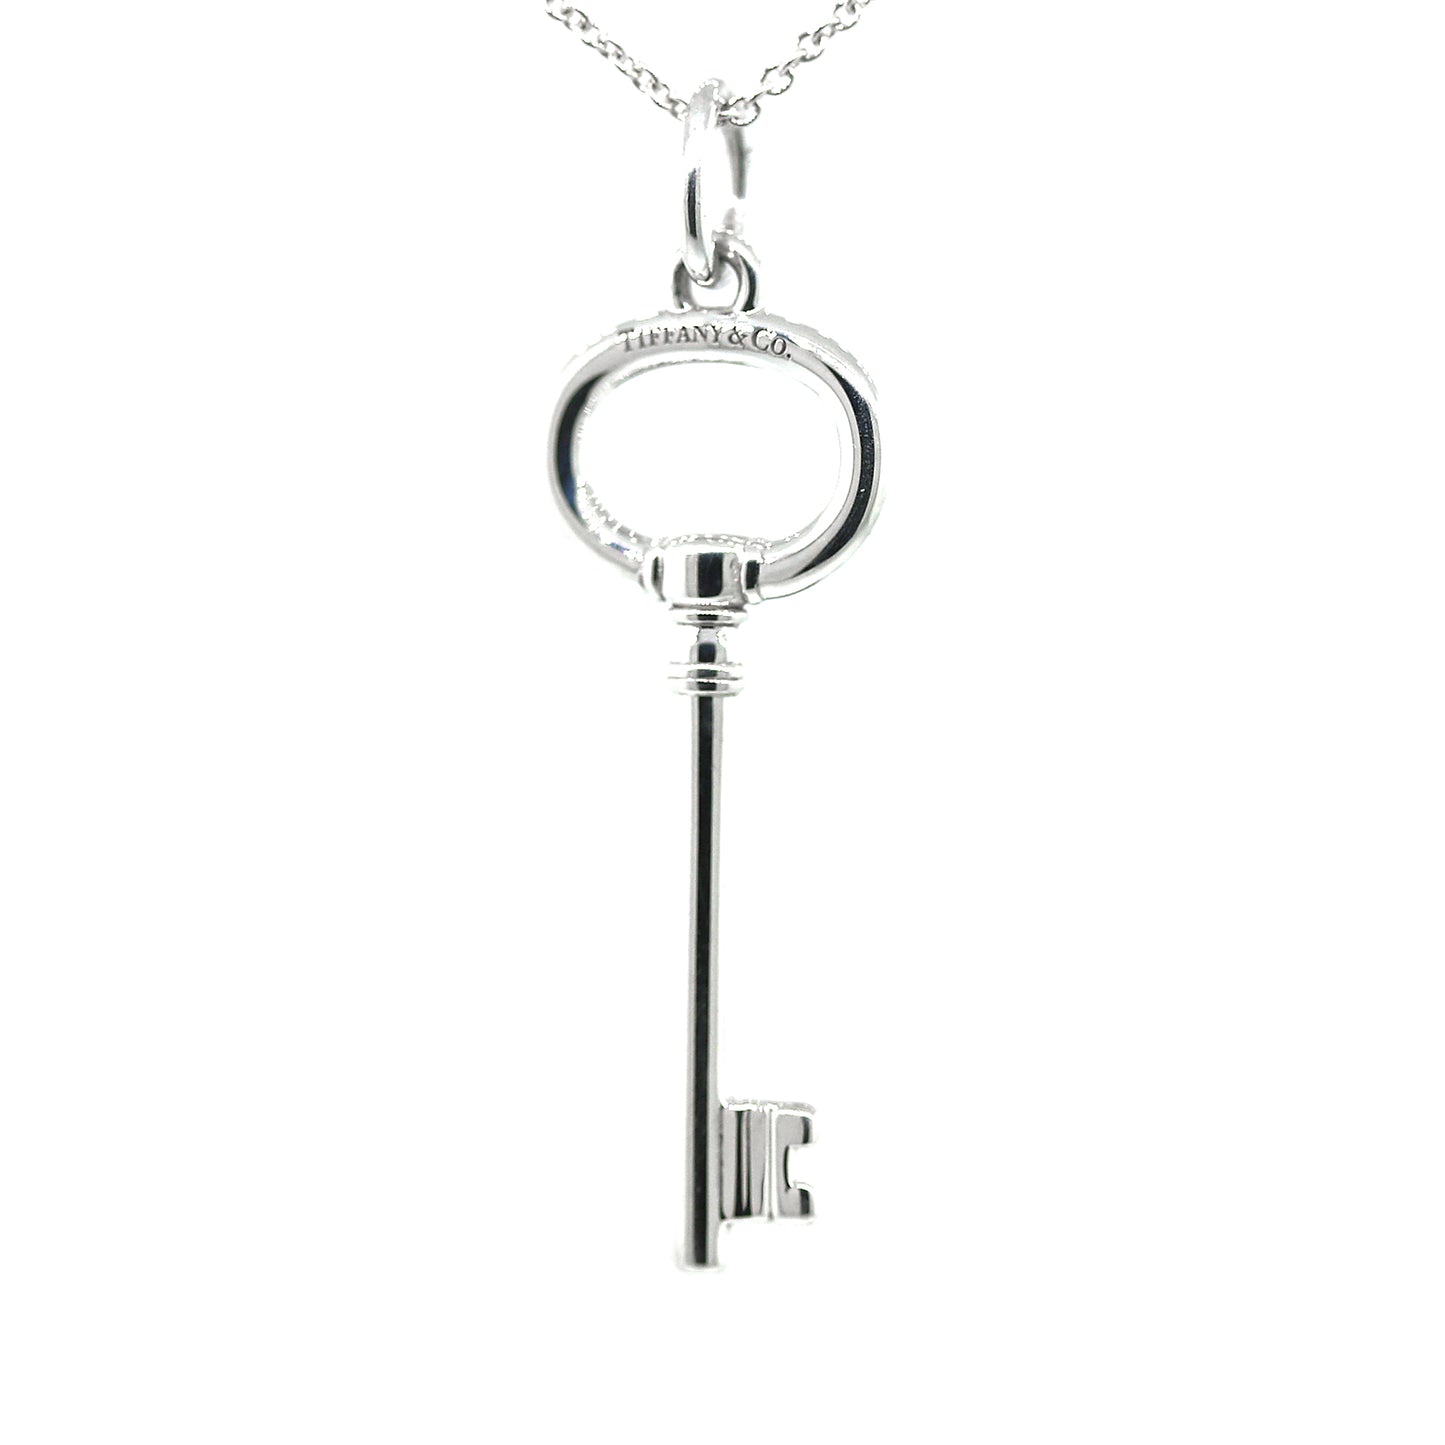 Pre-Owned Tiffany & Co. Key Necklace in Sterling Silver –